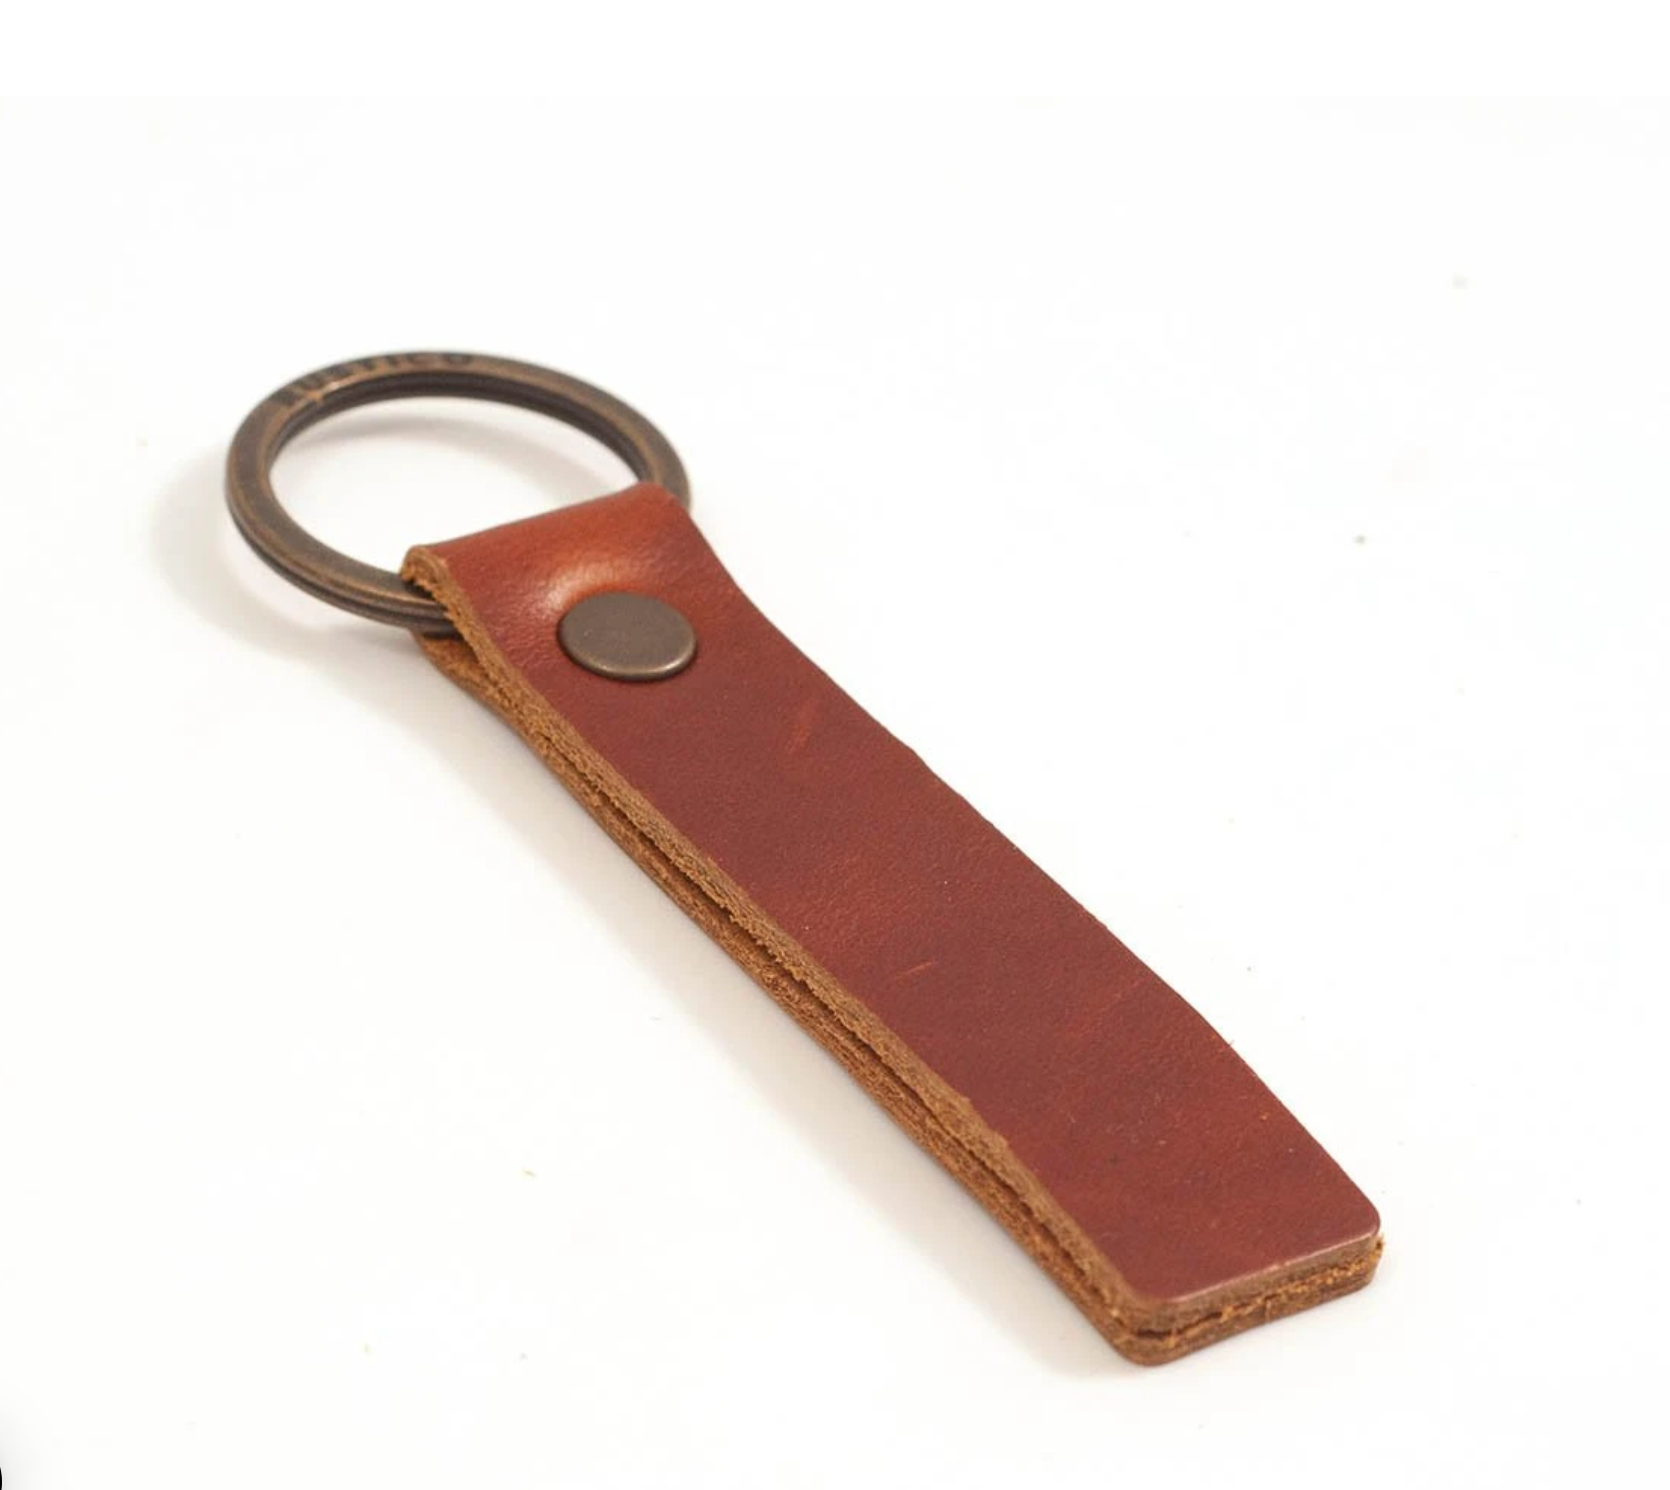 Leather Key Fob from Arnold Leather Goods